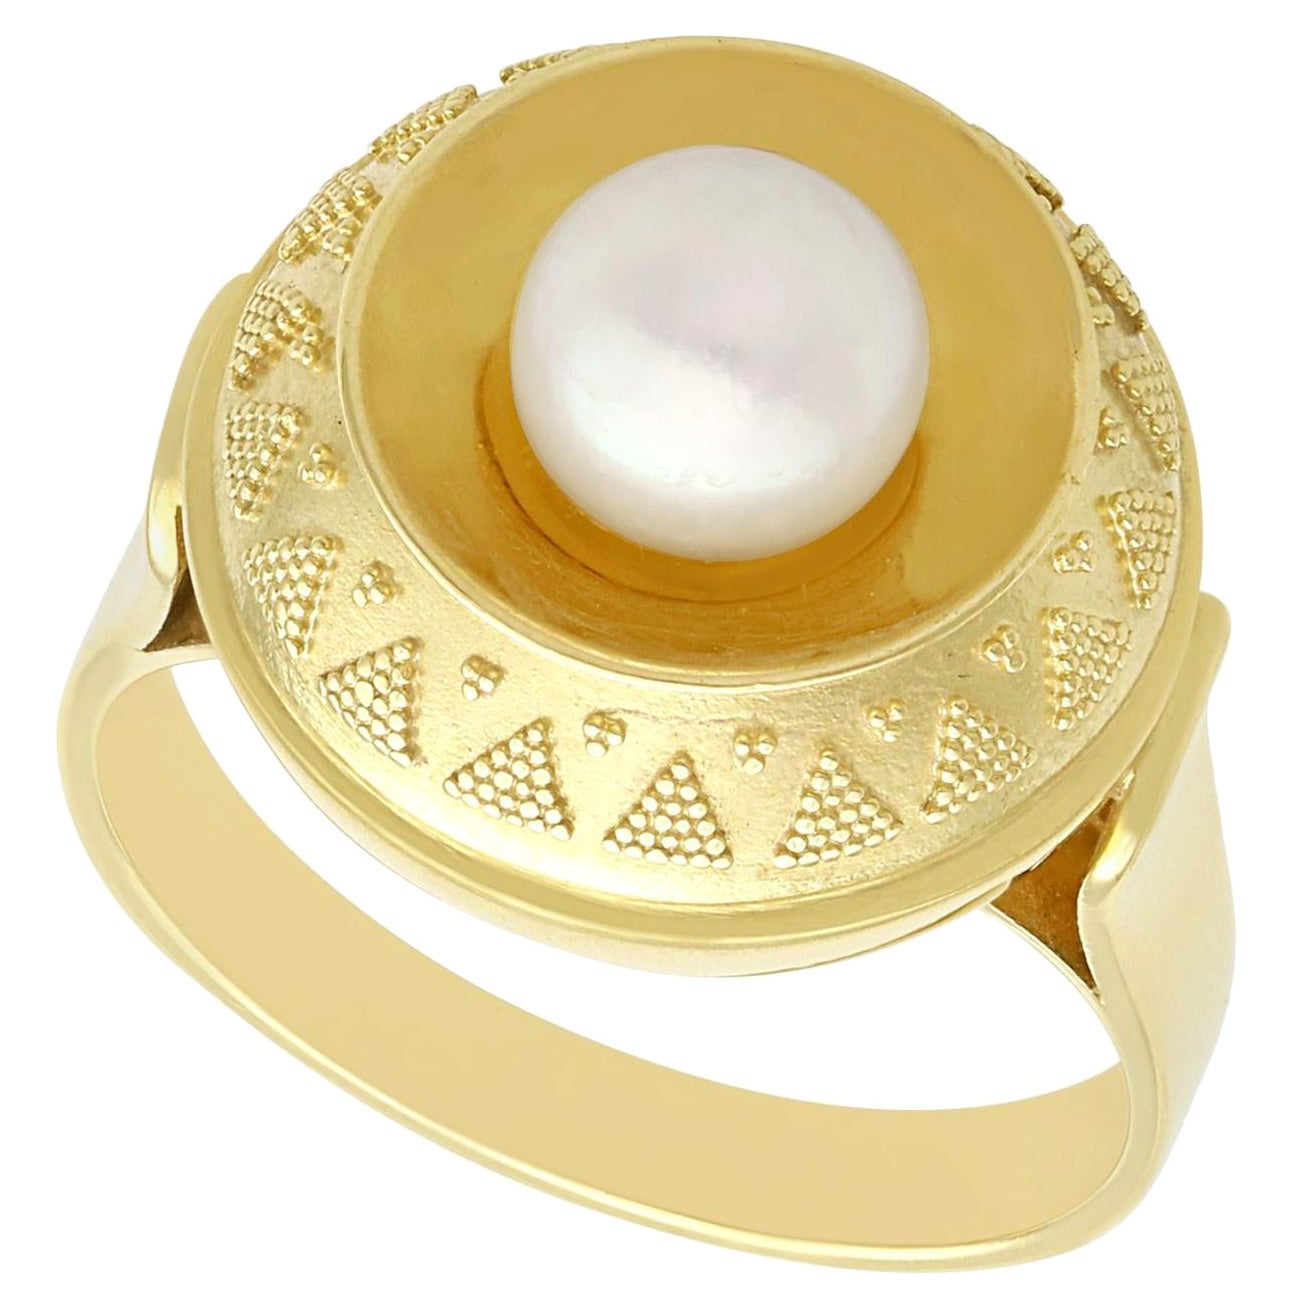 1960s Cultured Pearl 14k Yellow Gold Cocktail Ring